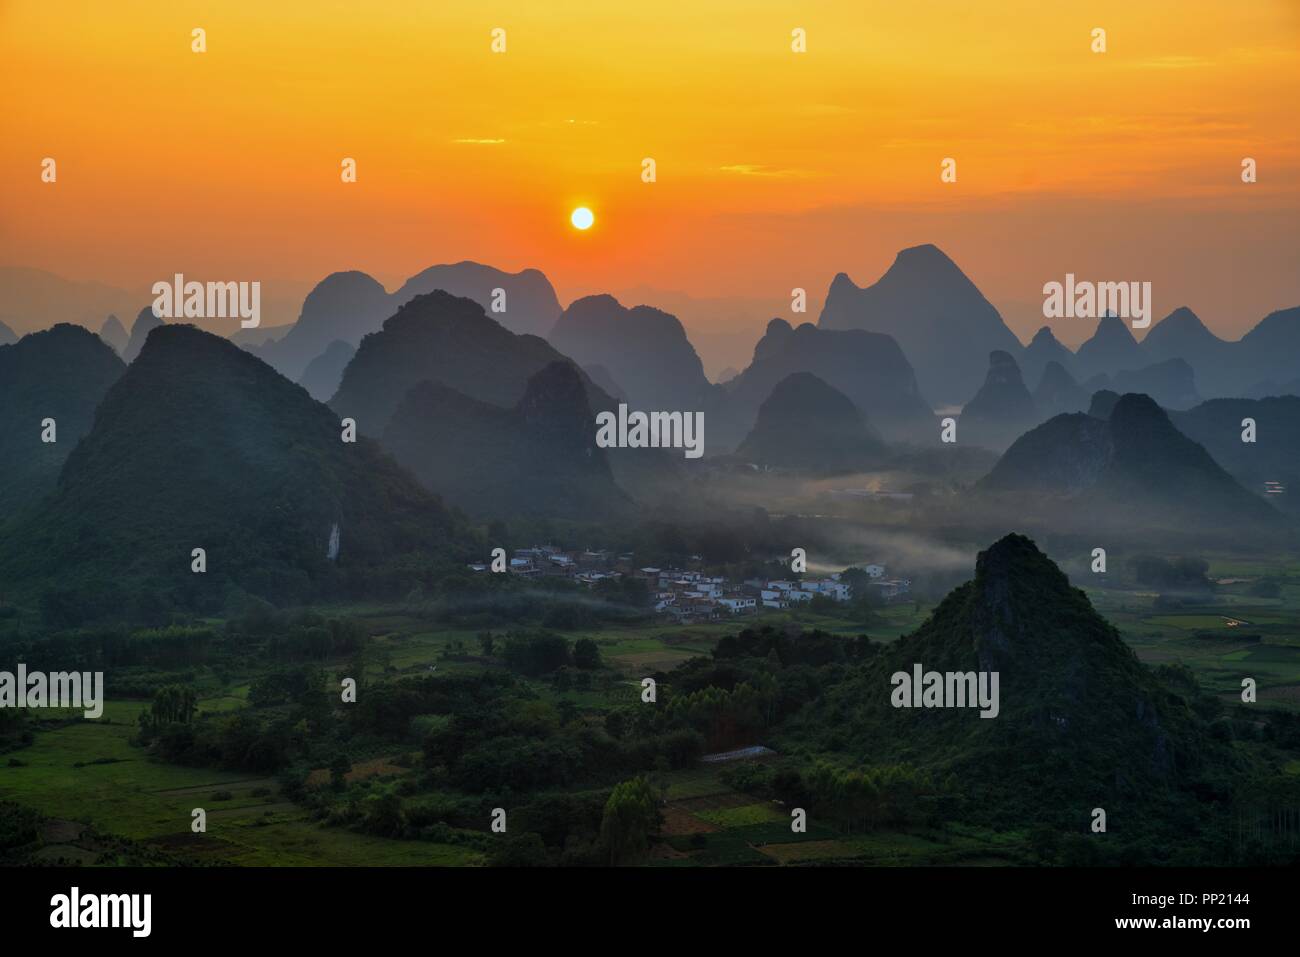 Landscape of Guilin, China. Li River and Karst mountains called Cuiping or    Five Finger mount located at Guangxi Province, China. Stock Photo